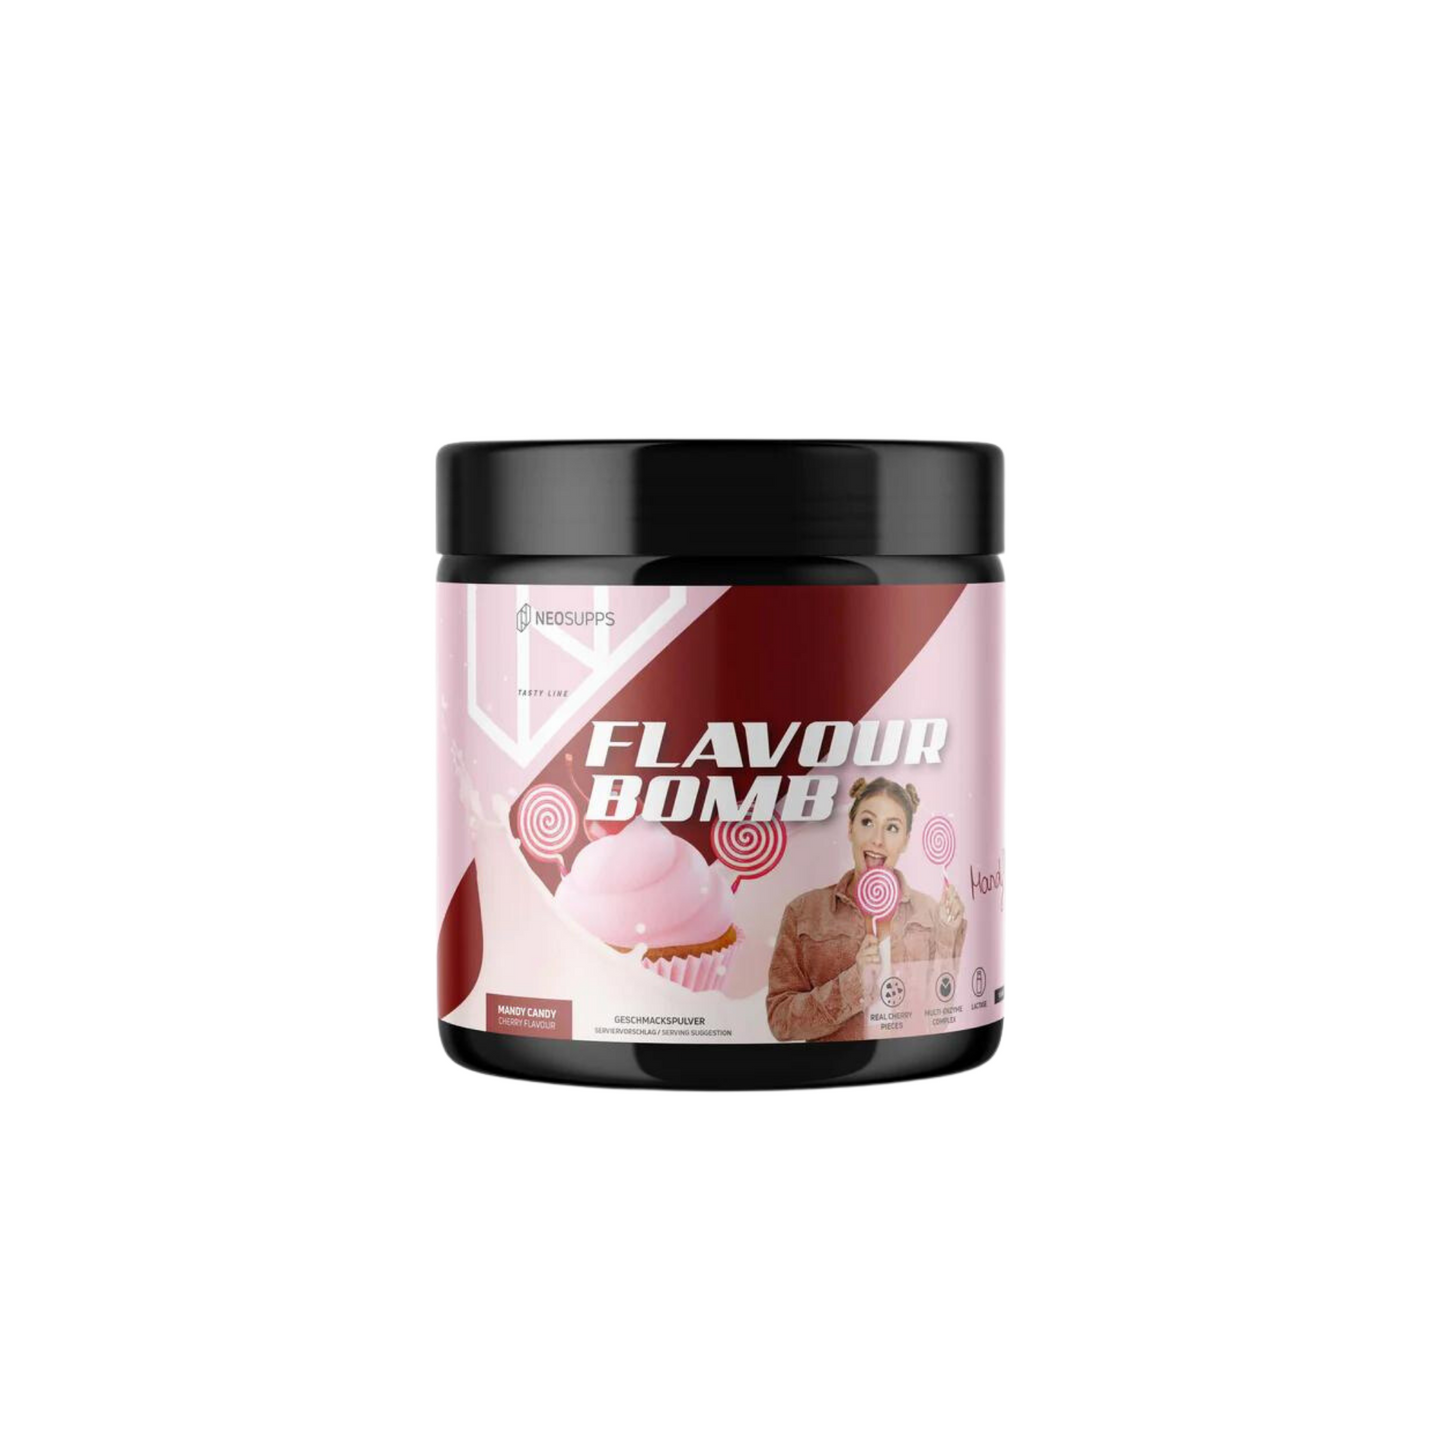 NEOSUPPS Flavour Bomb 250g